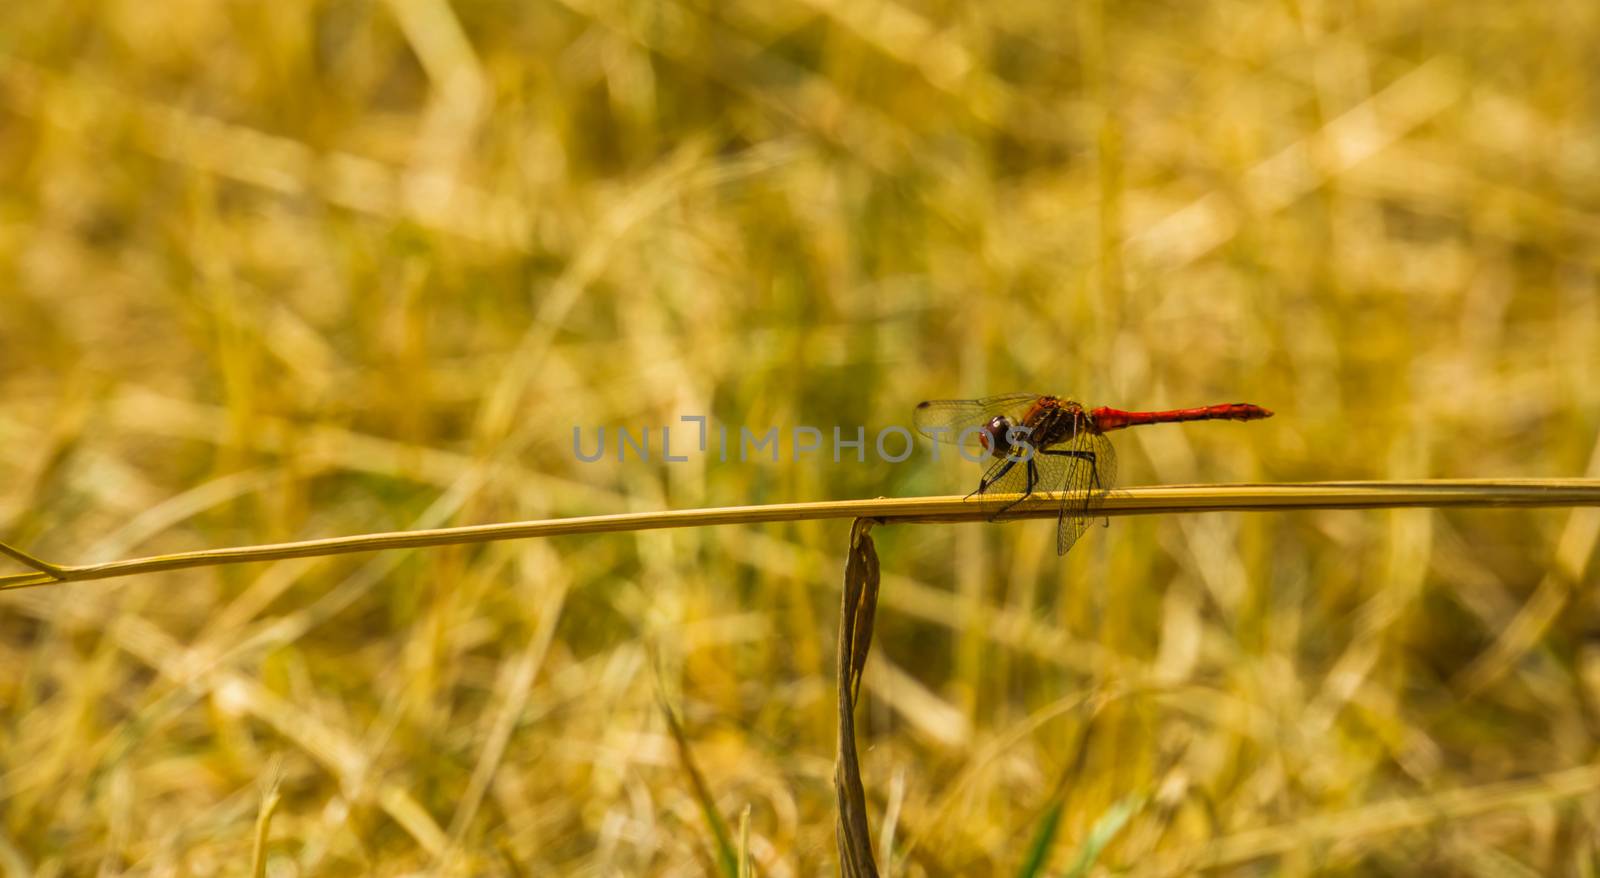 portrait of a ruddy darter sitting on a blade of grass, fire red dragonfly, common insect specie from Europe by charlottebleijenberg